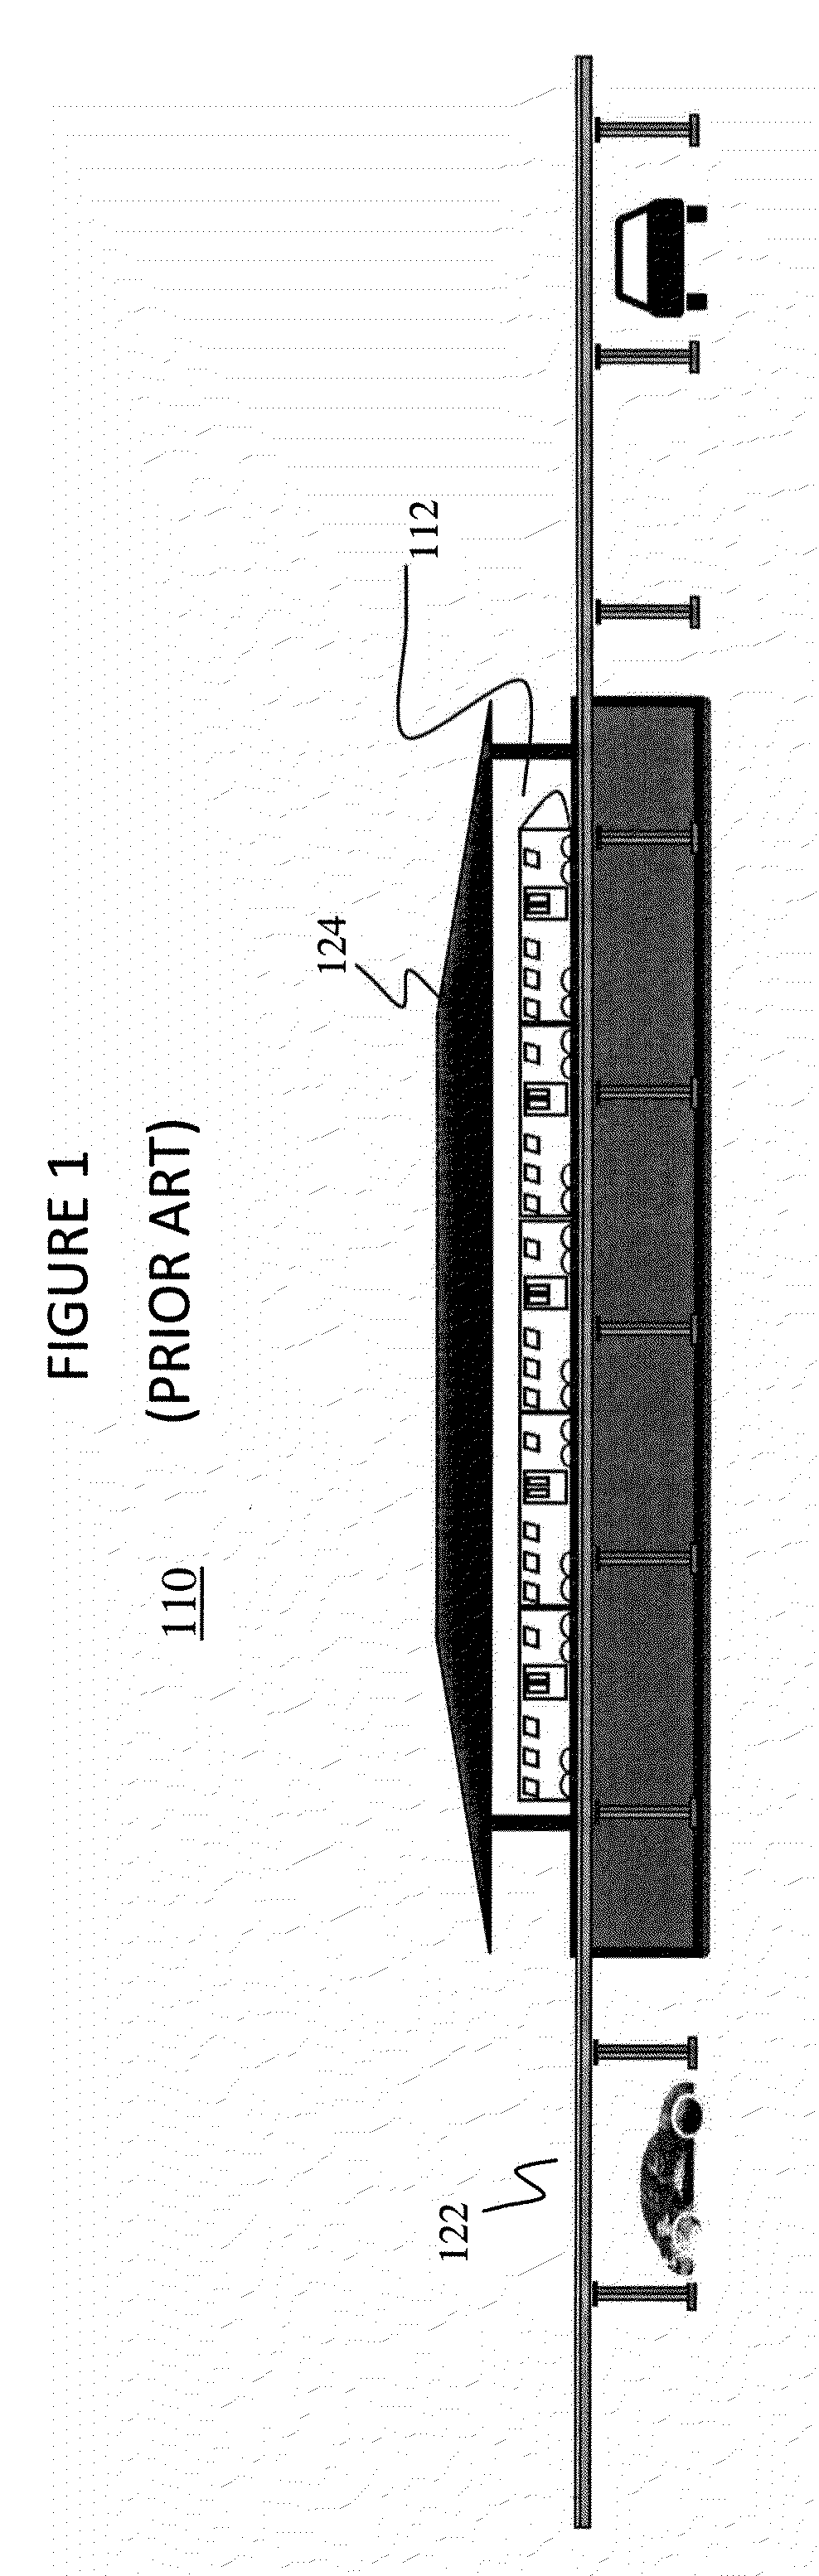 Vehicle-based switch mechanisms in fixed guideway transportation systems and methods for controlling same